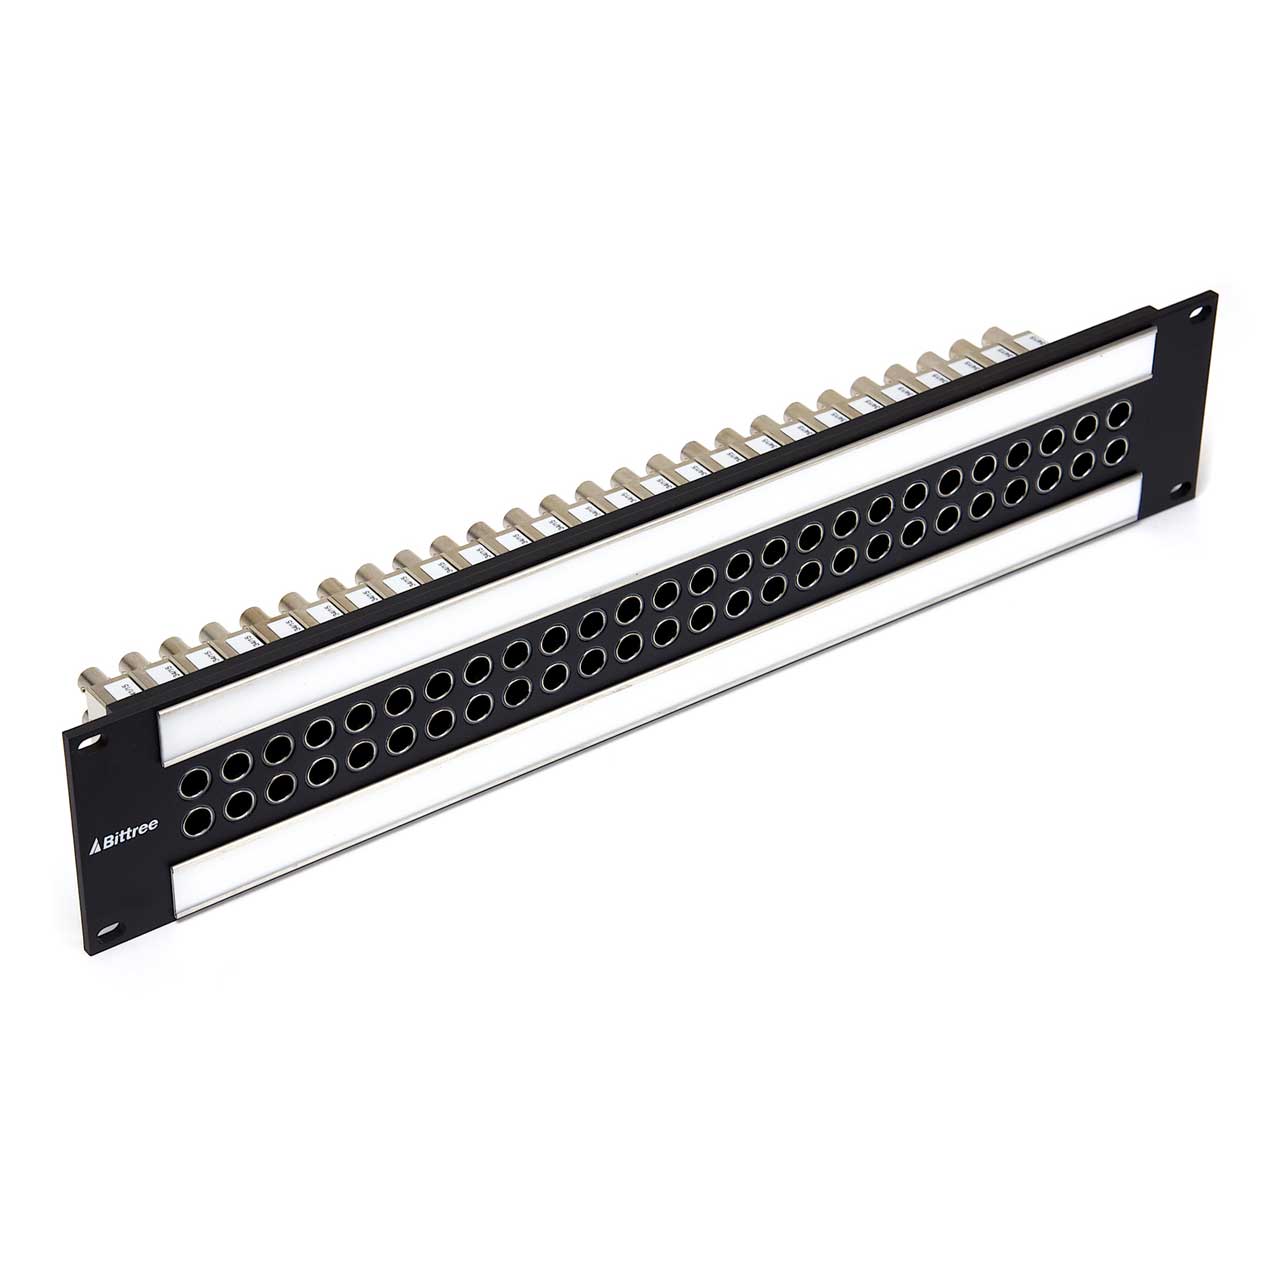 Bittree B52T-1WTHD WECO Low Density Patchbay - 2 Rows 26 Patch Points - 2RU - Non-Normalled - 75ohm Termination - 3G SDI